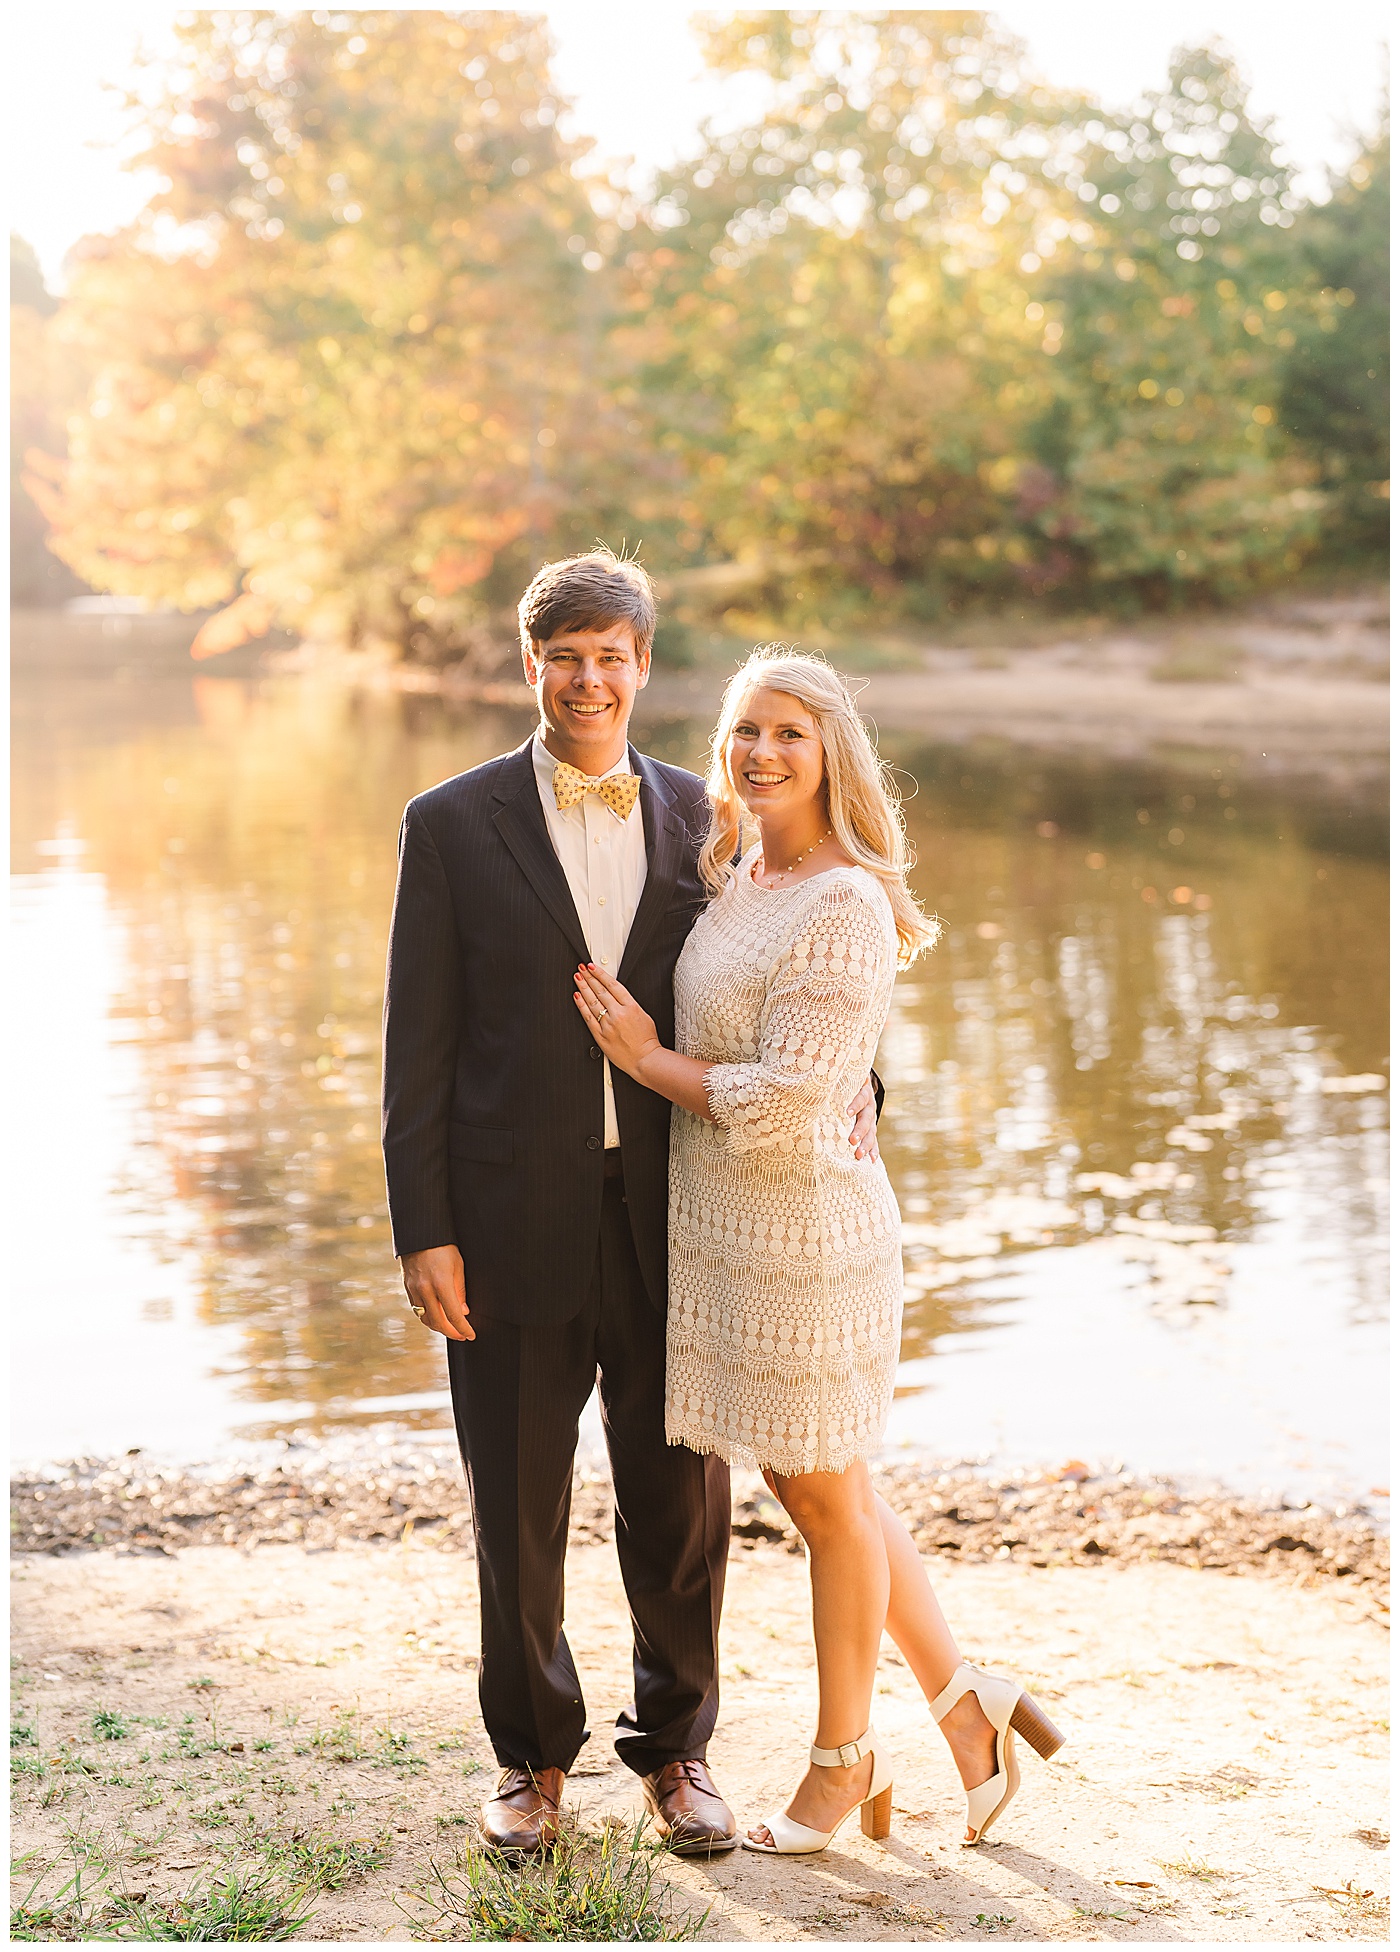 Sewanee The University of the South the Couple